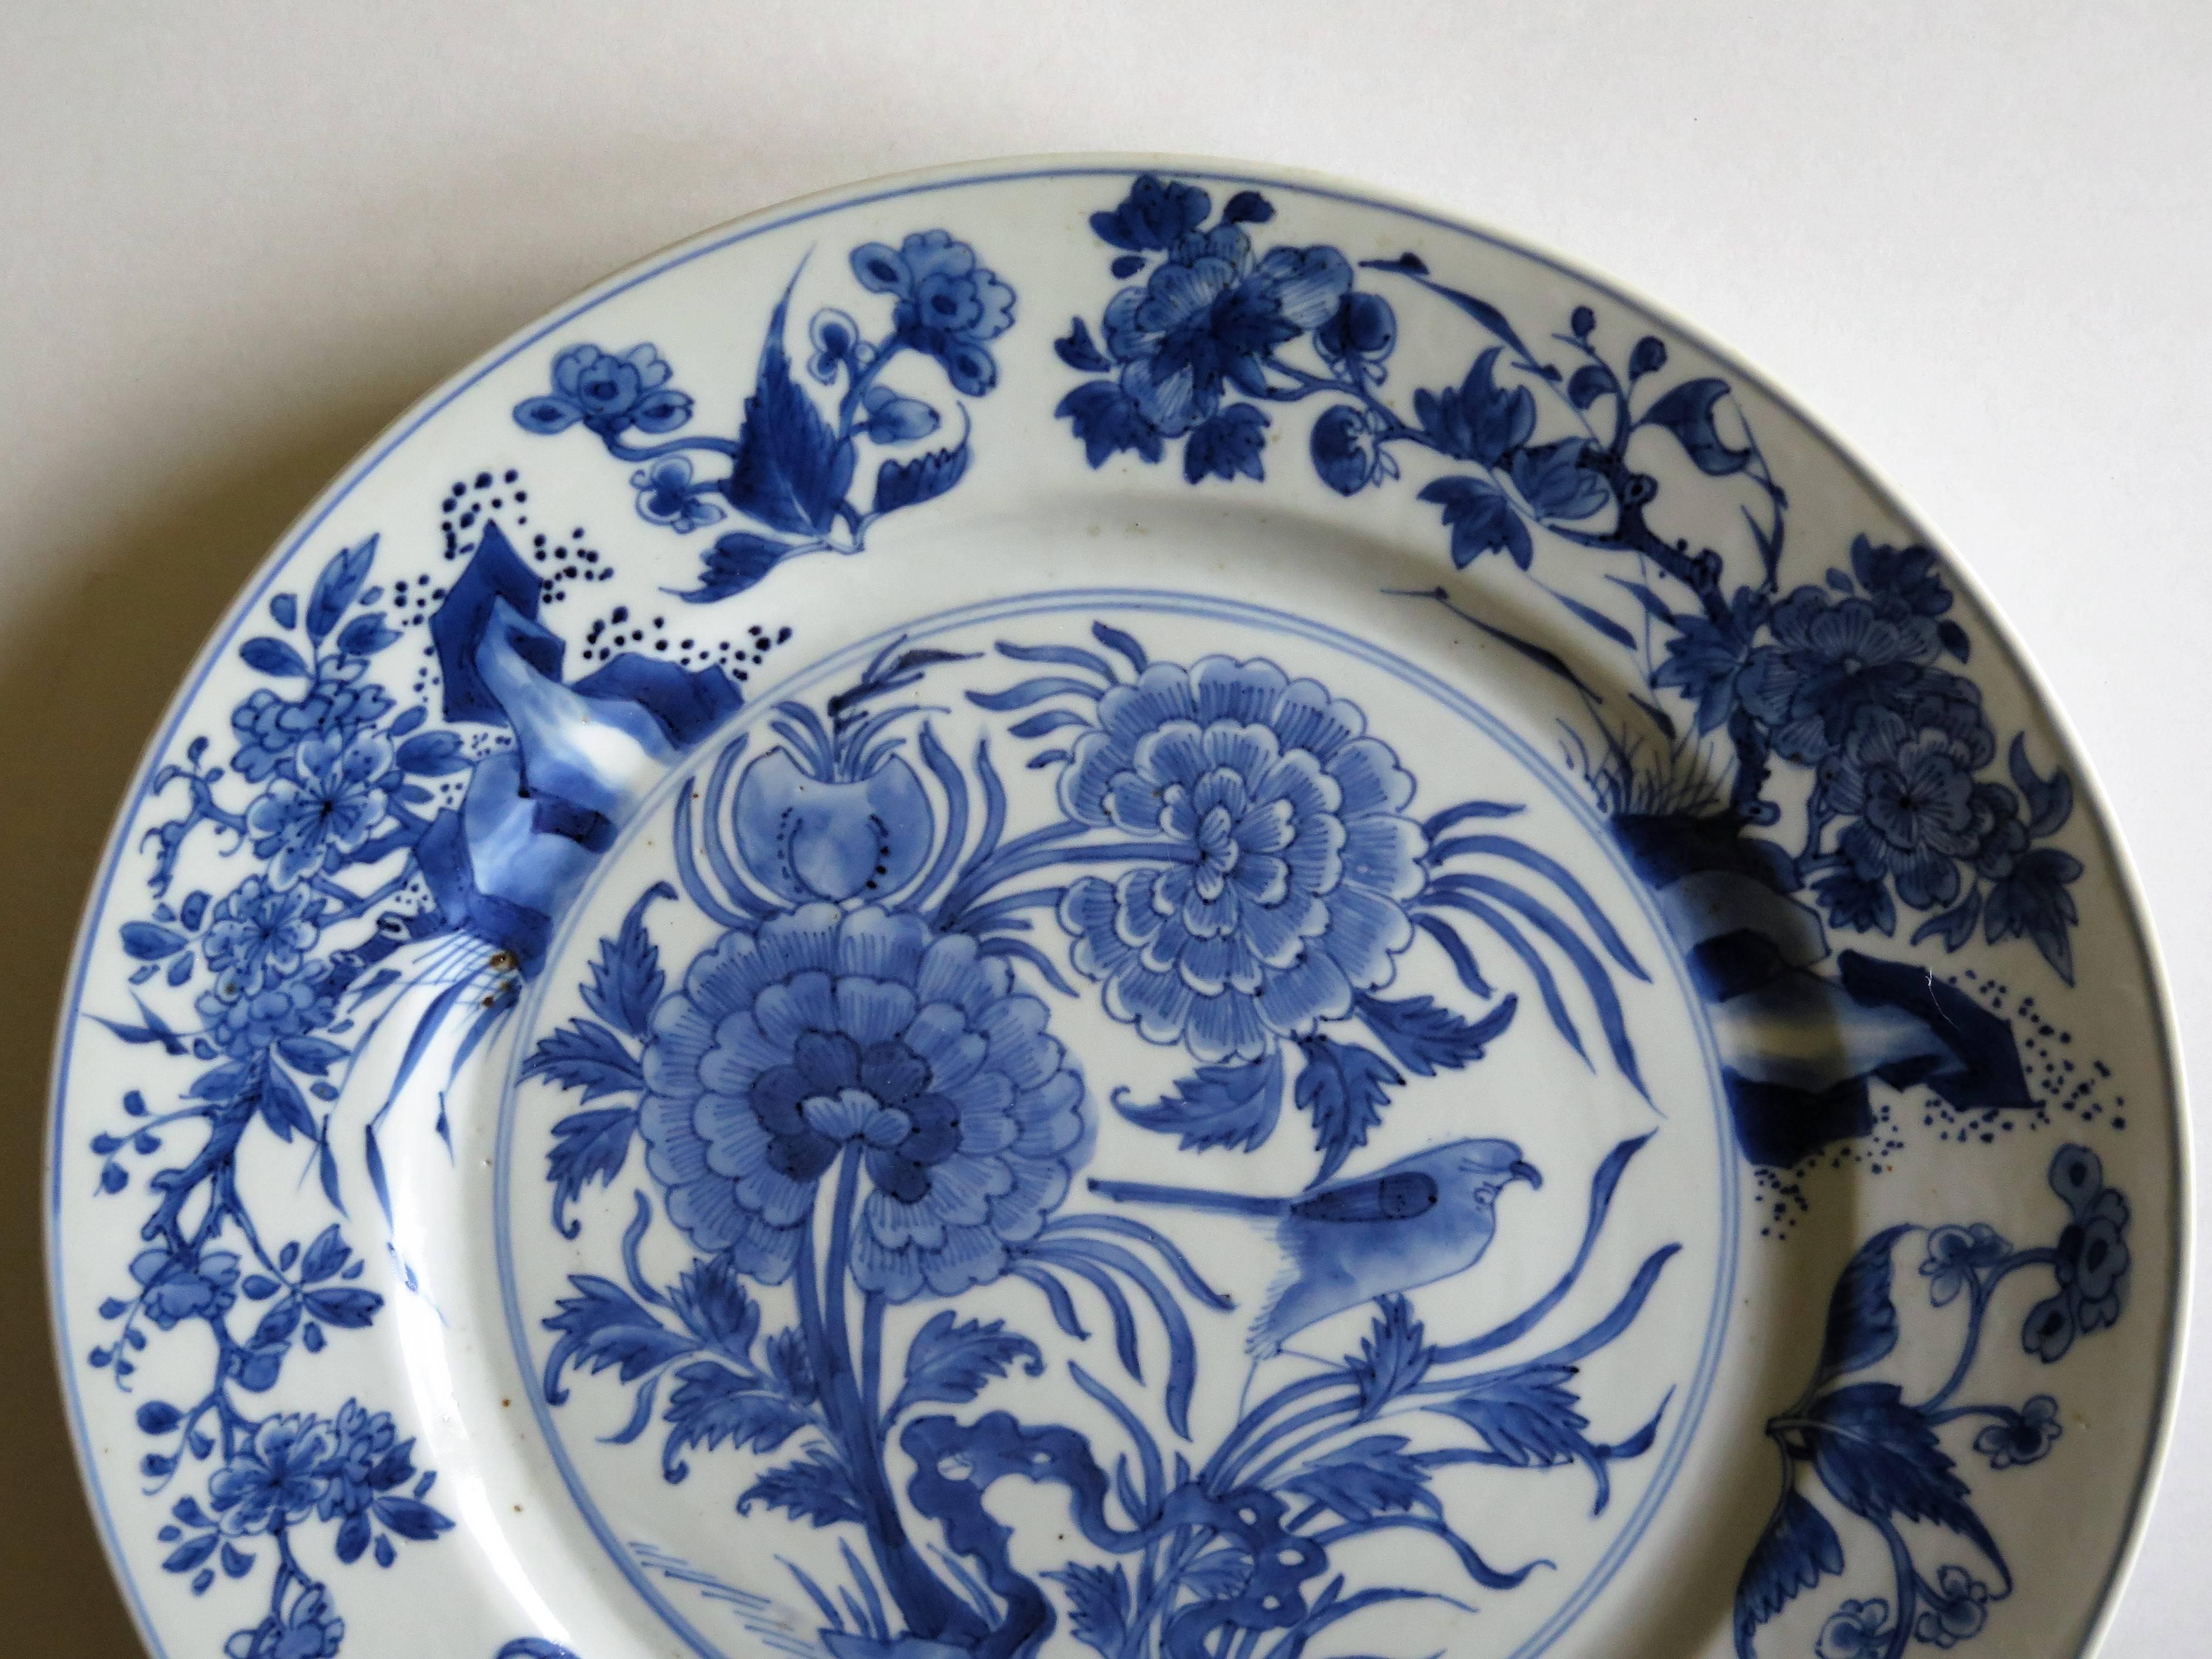 Hand-Painted Fine Chinese Porcelain Blue and White Plate, Kangxi Period and Mark Circa 1700